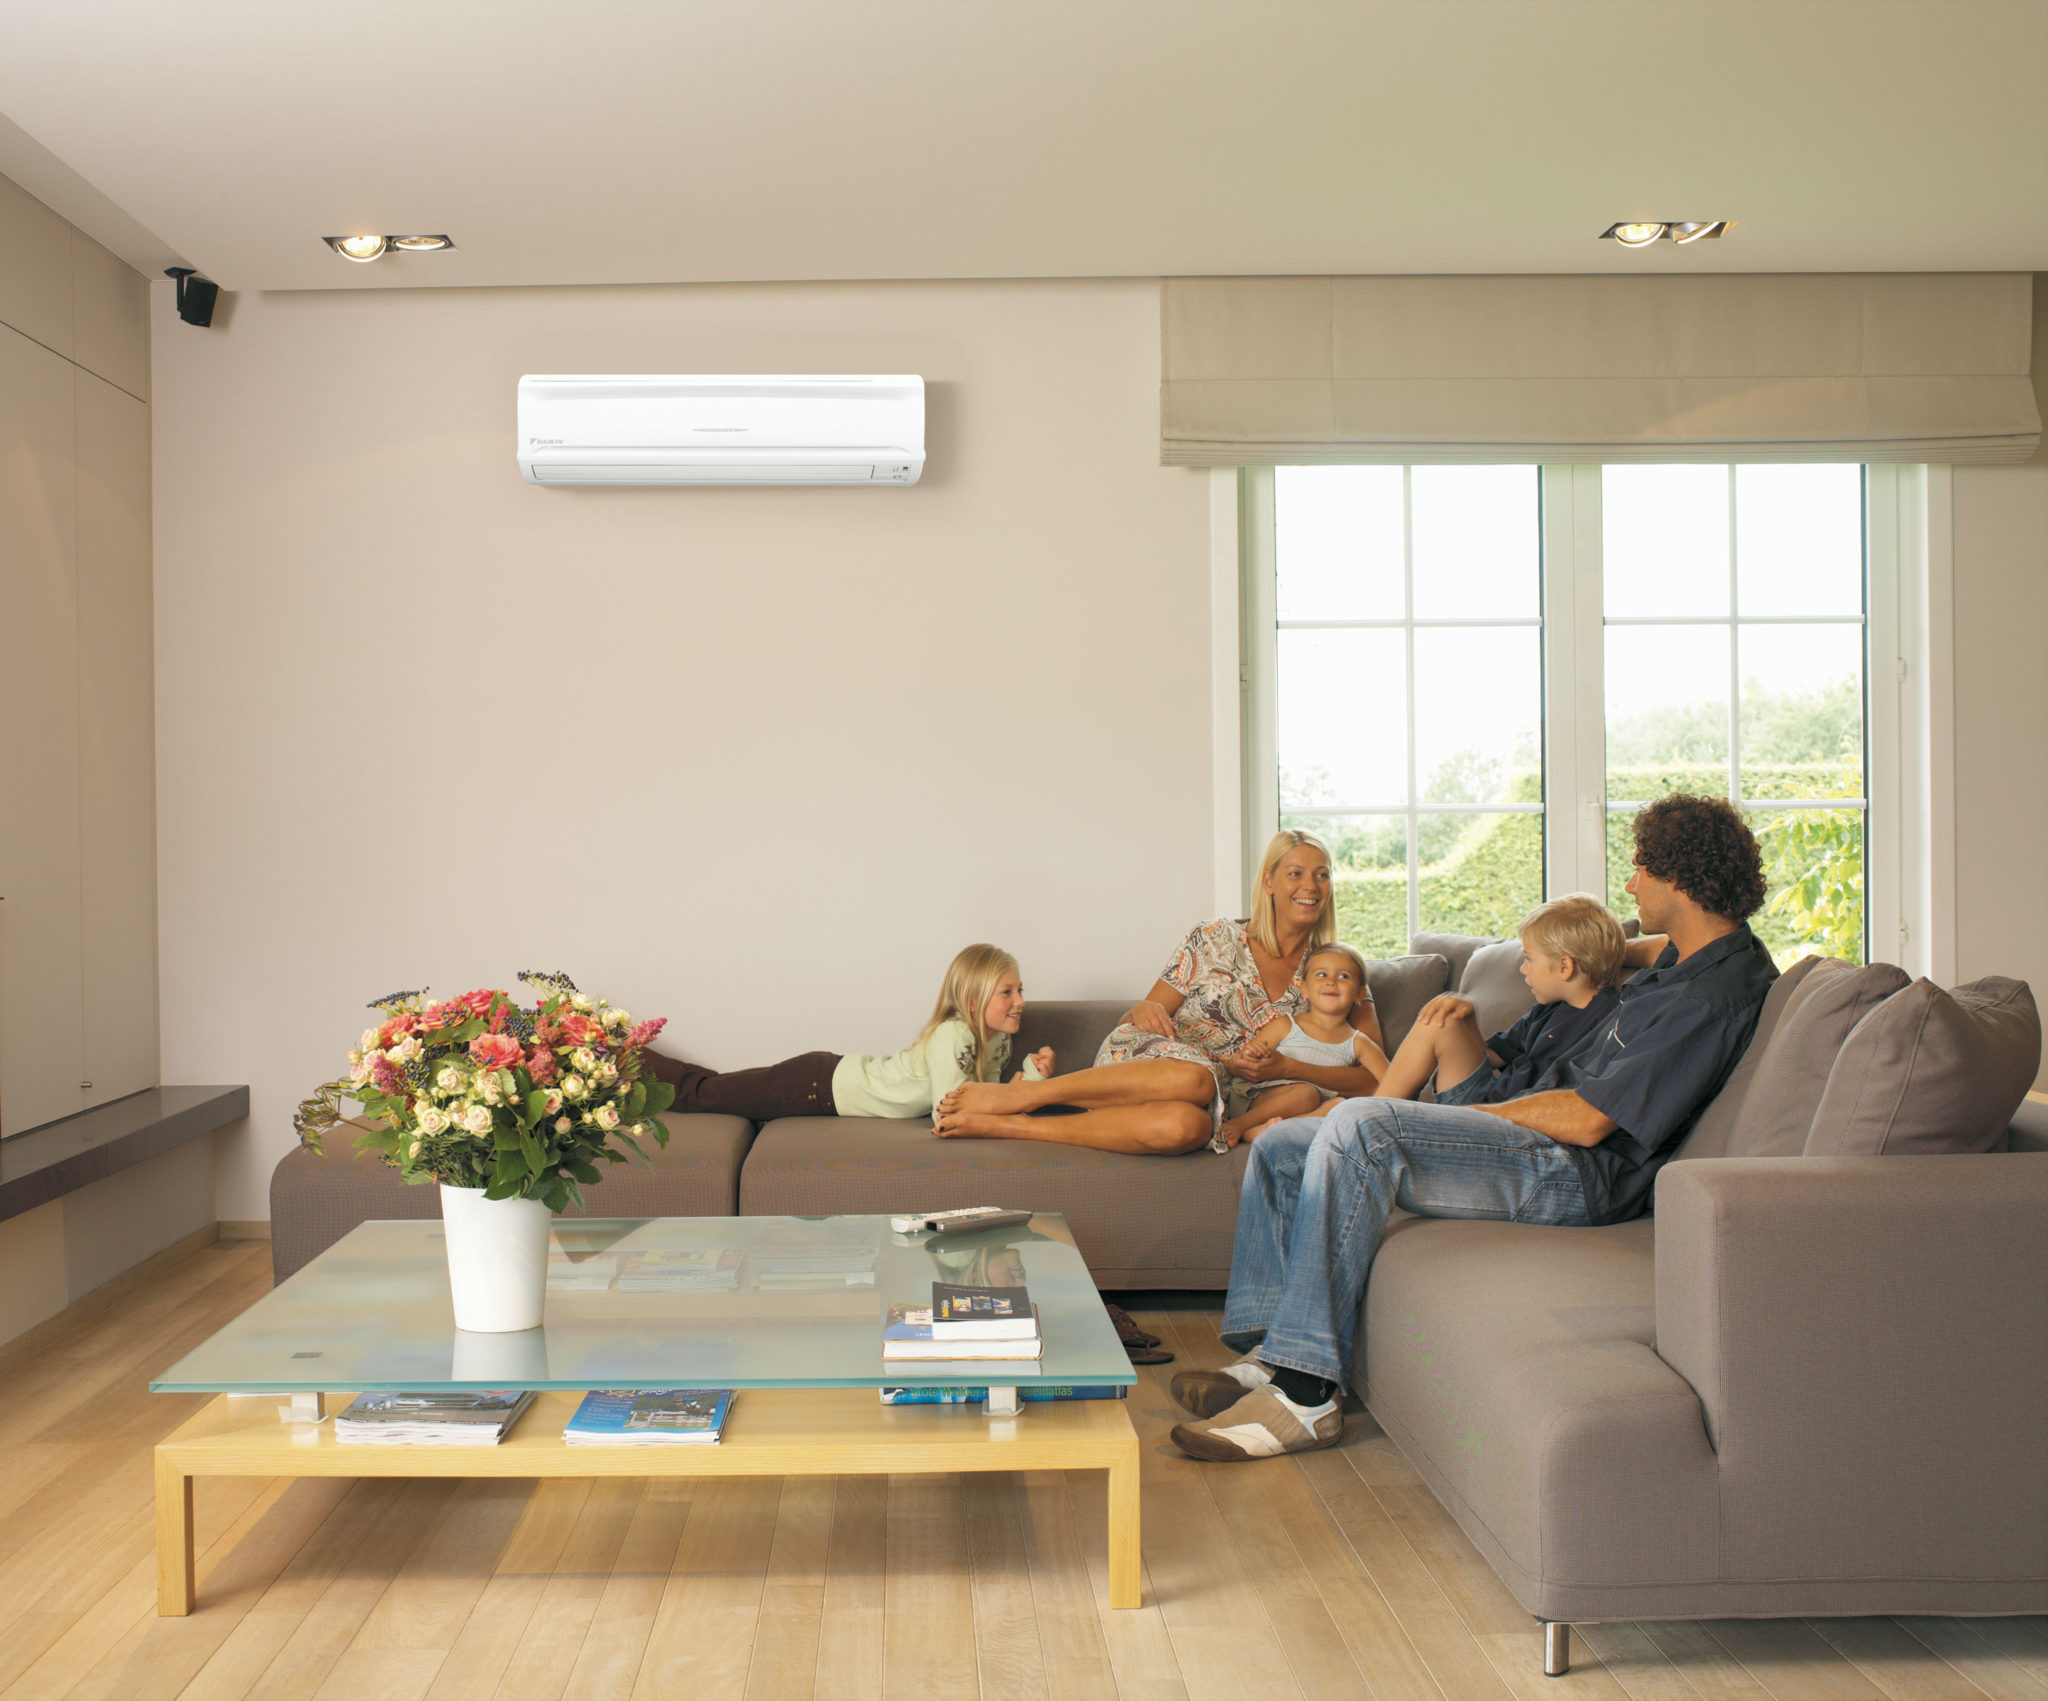 Family on couch in air conditioning image